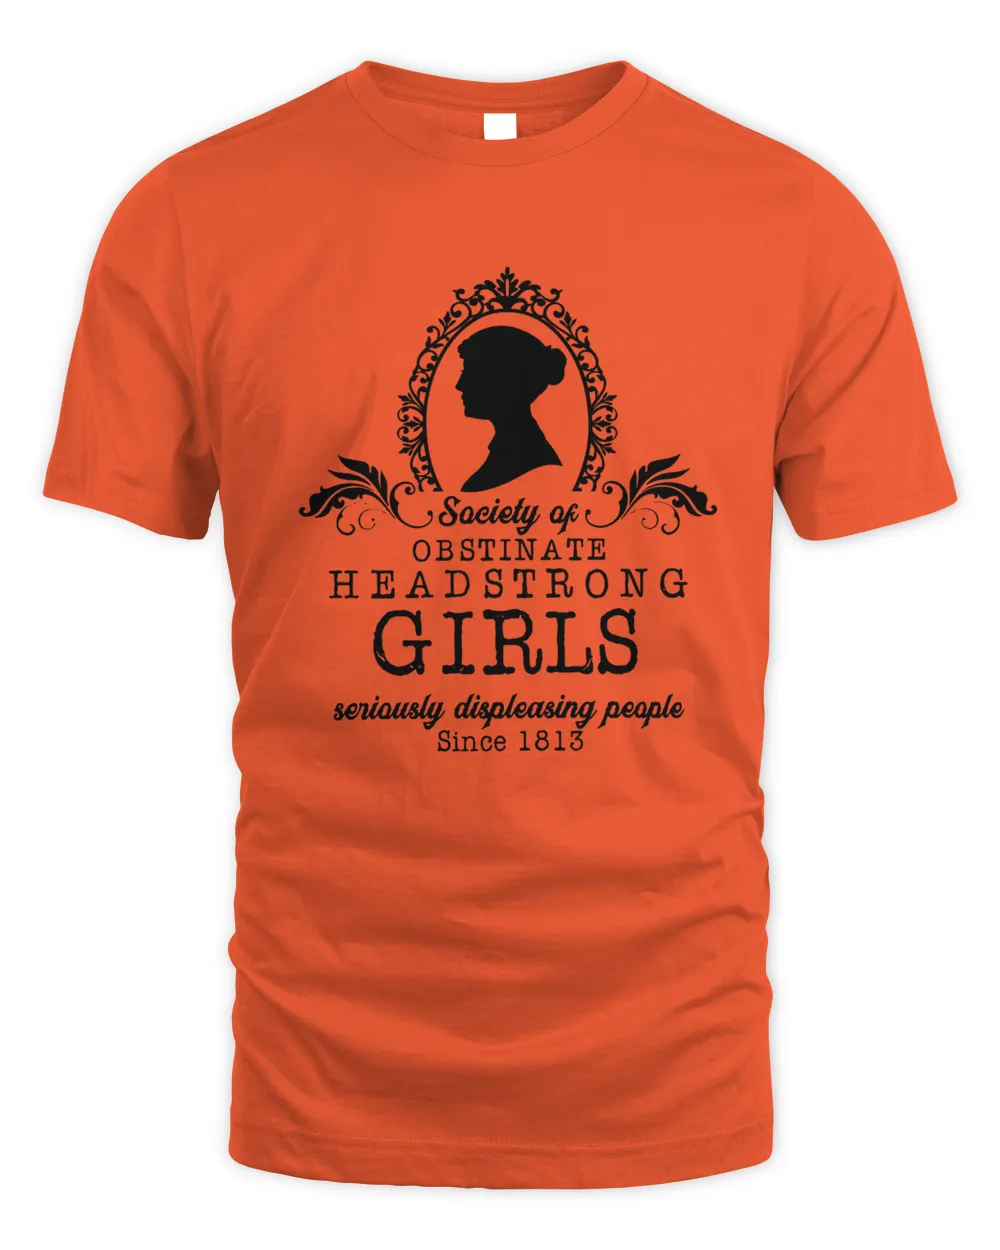 Jane Austen Journal Society for Obstinate Headstrong Girls: Seriously Displeasing People shirt